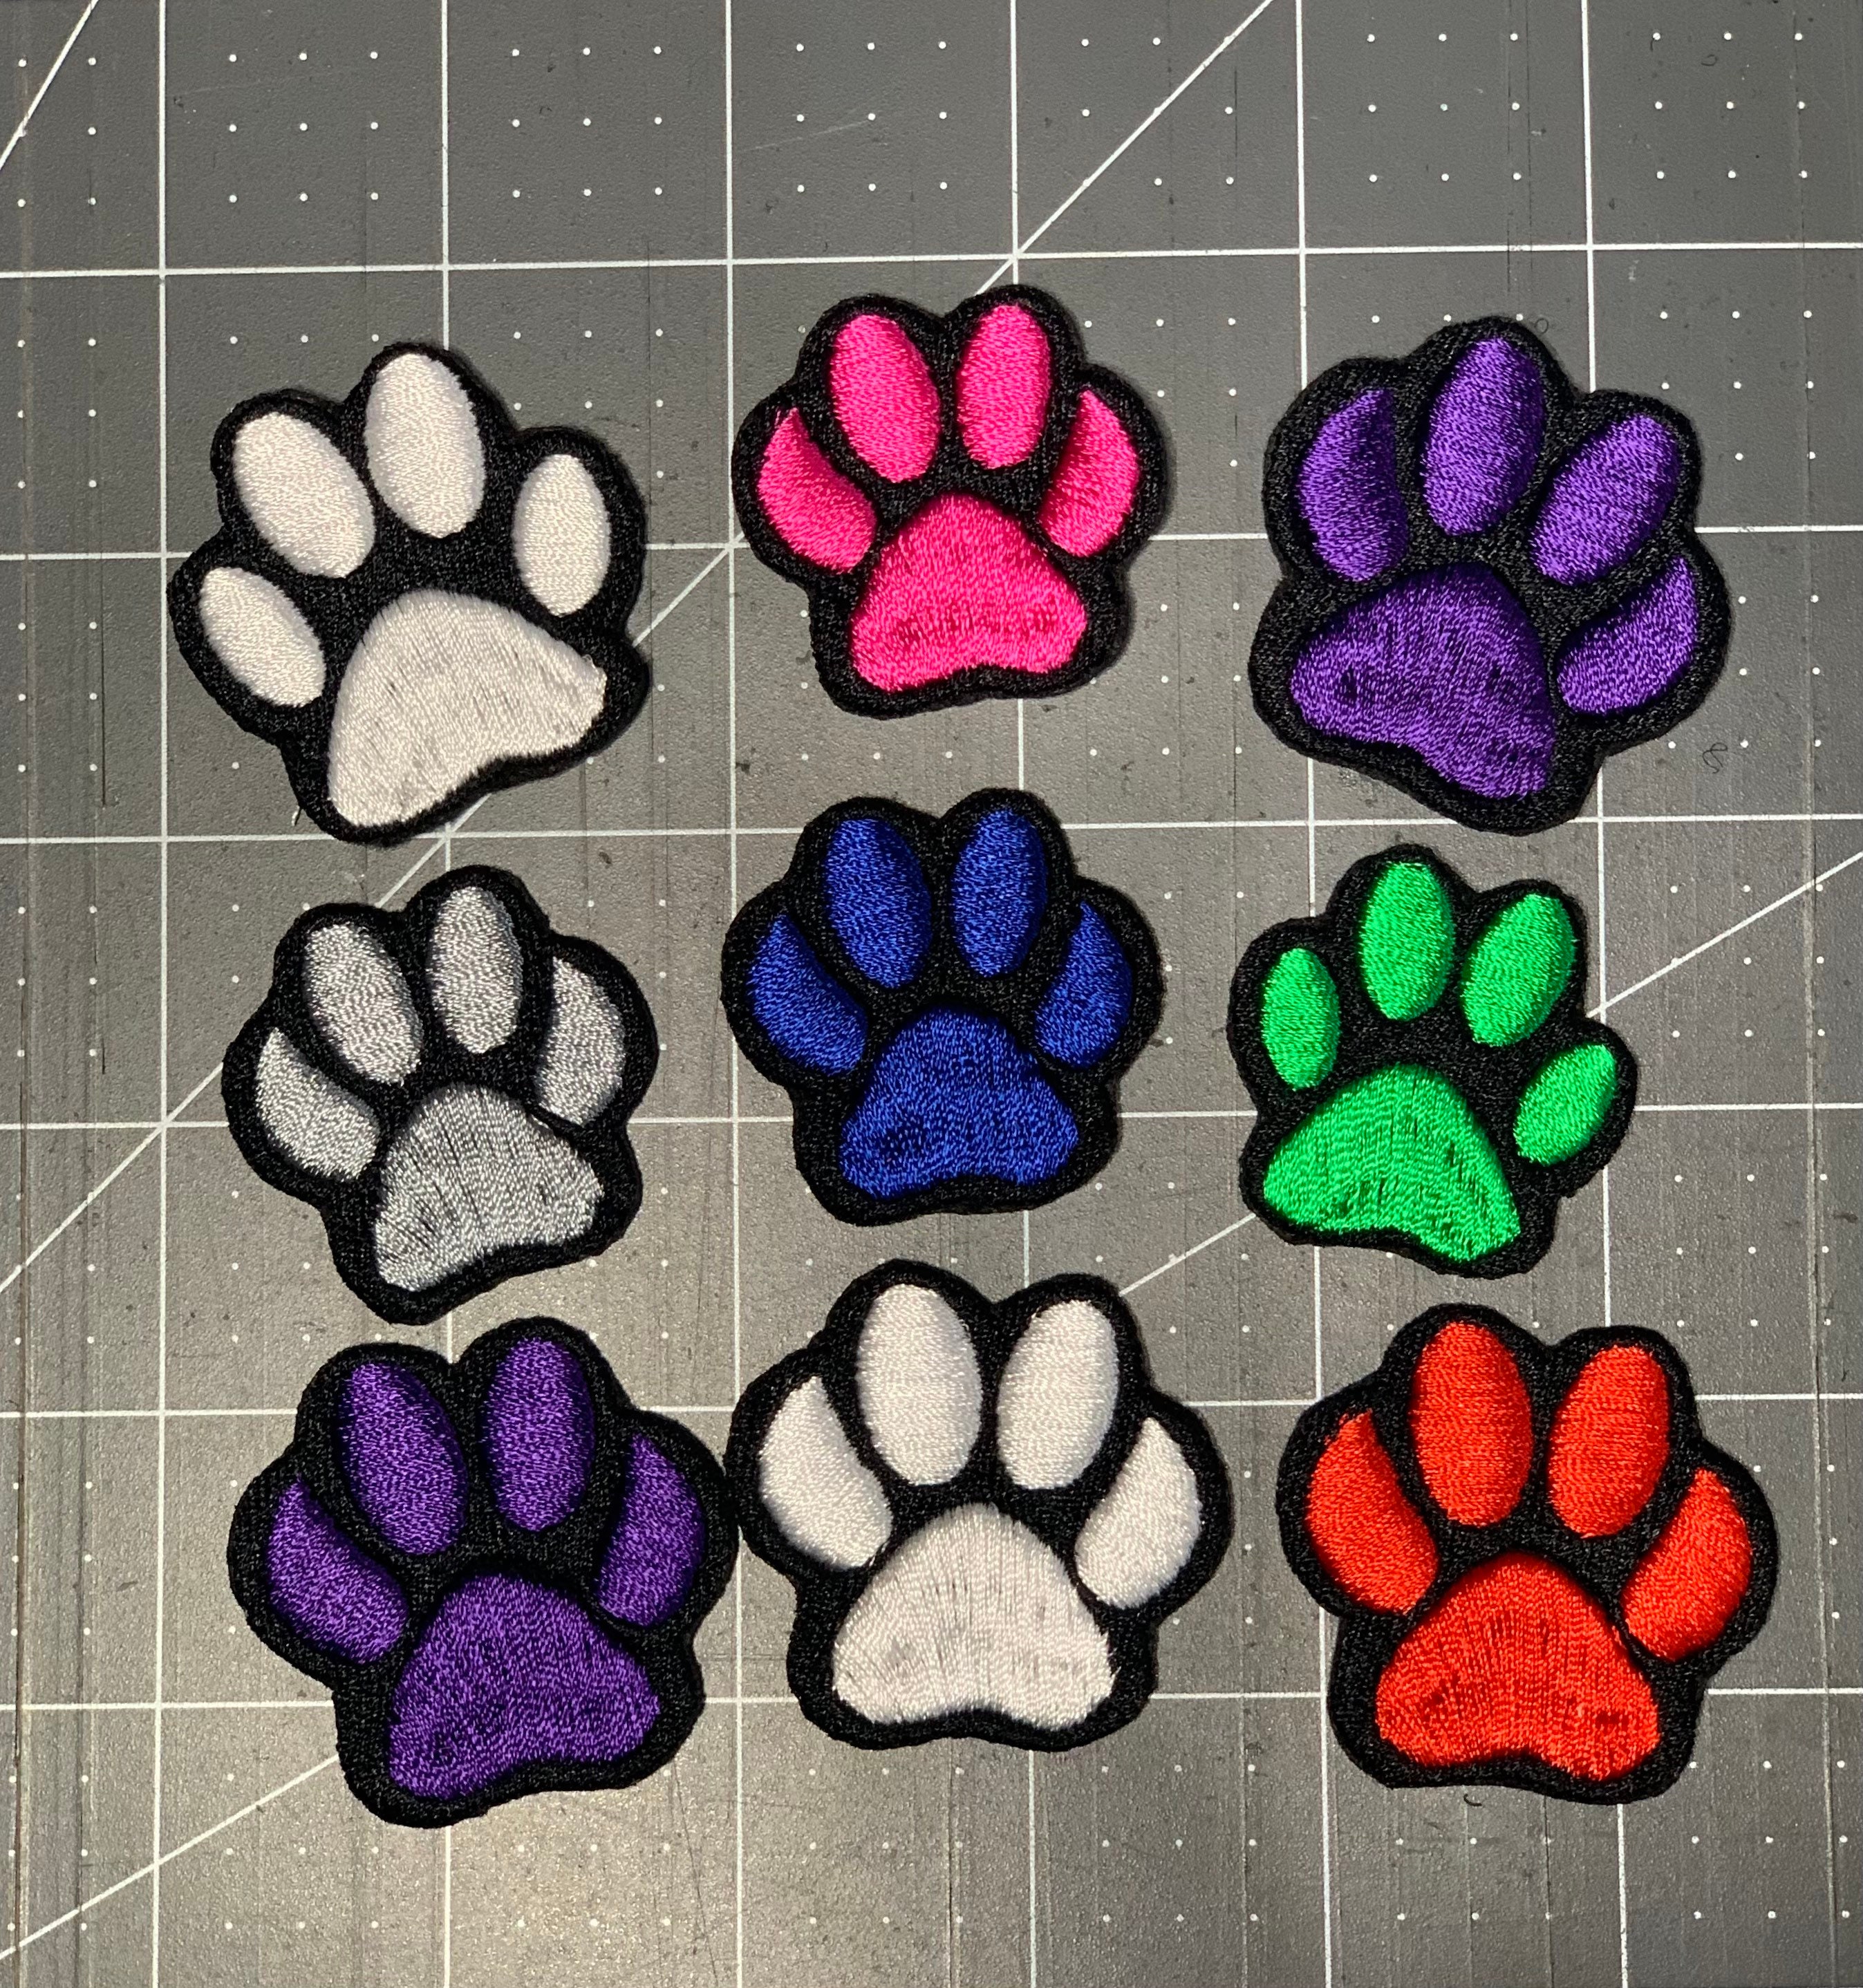 Embroidered Paw Iron-on Patch, 6Pcs Small Dog Paw Iron On/Sew on Patch,  Cute Morale Applique Repair Patch DIY Craft Accessories for Clothes Jacket